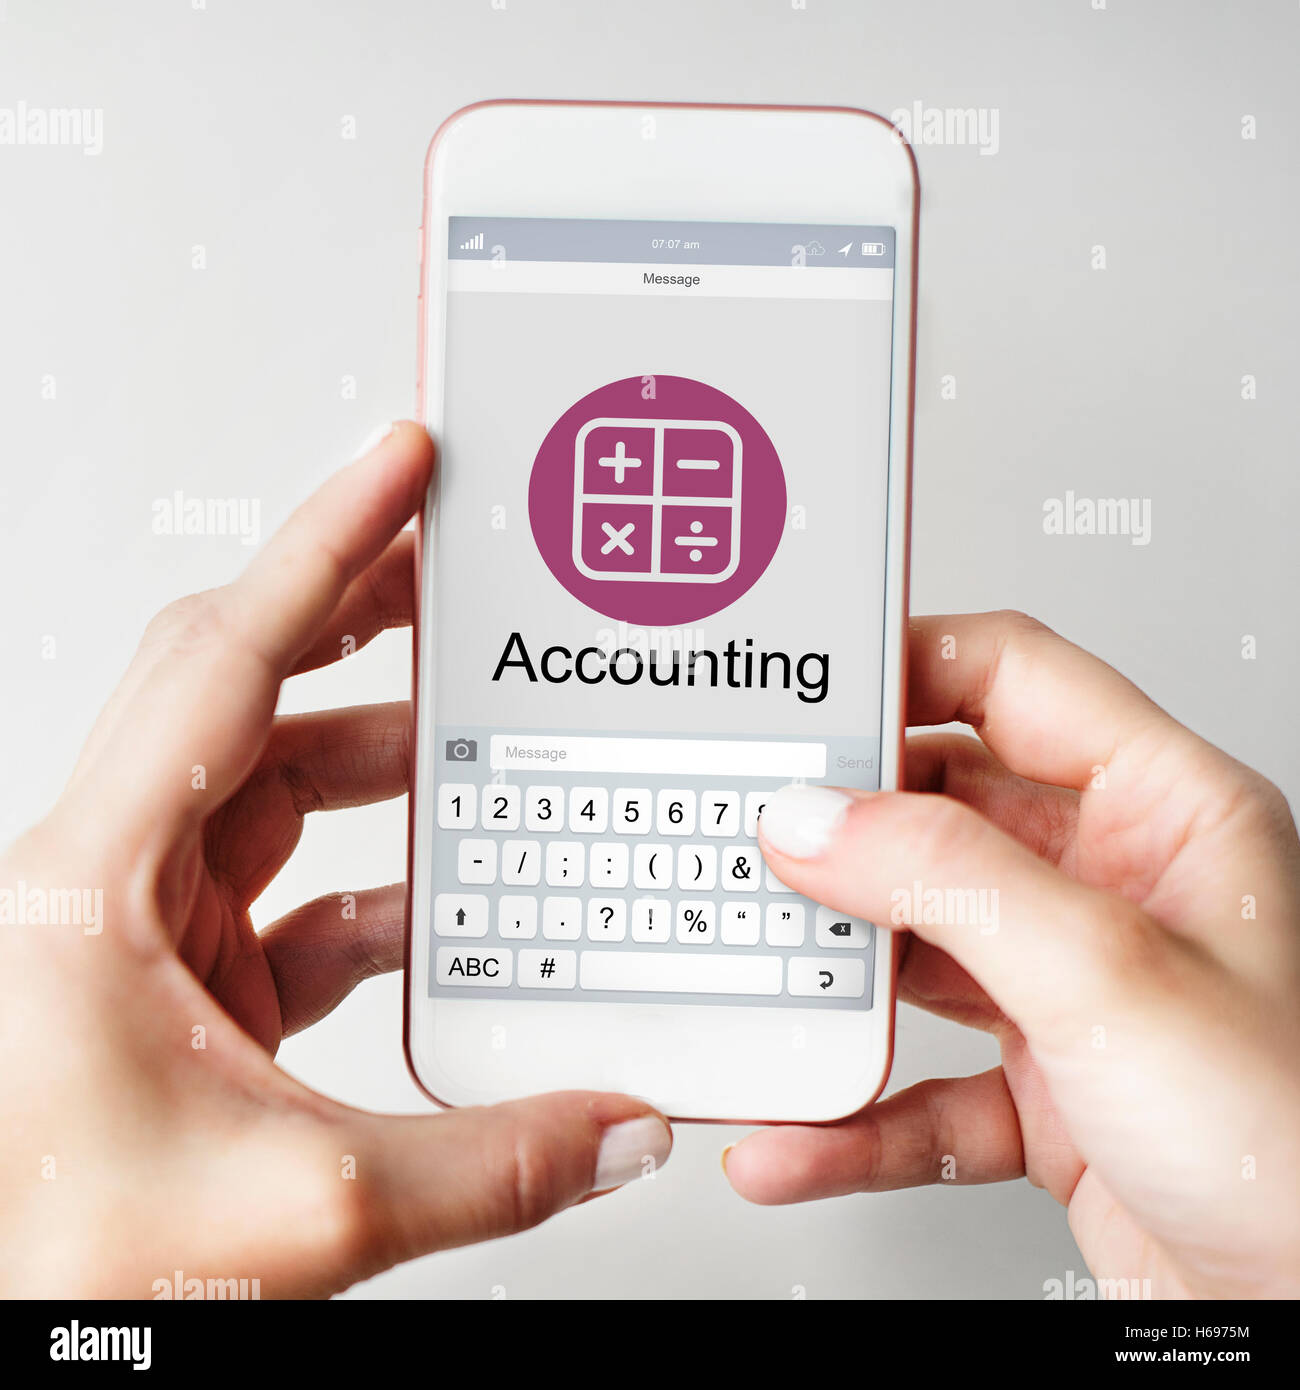 Accounting Budget Electronic Calculator Investment Concept Stock Photo